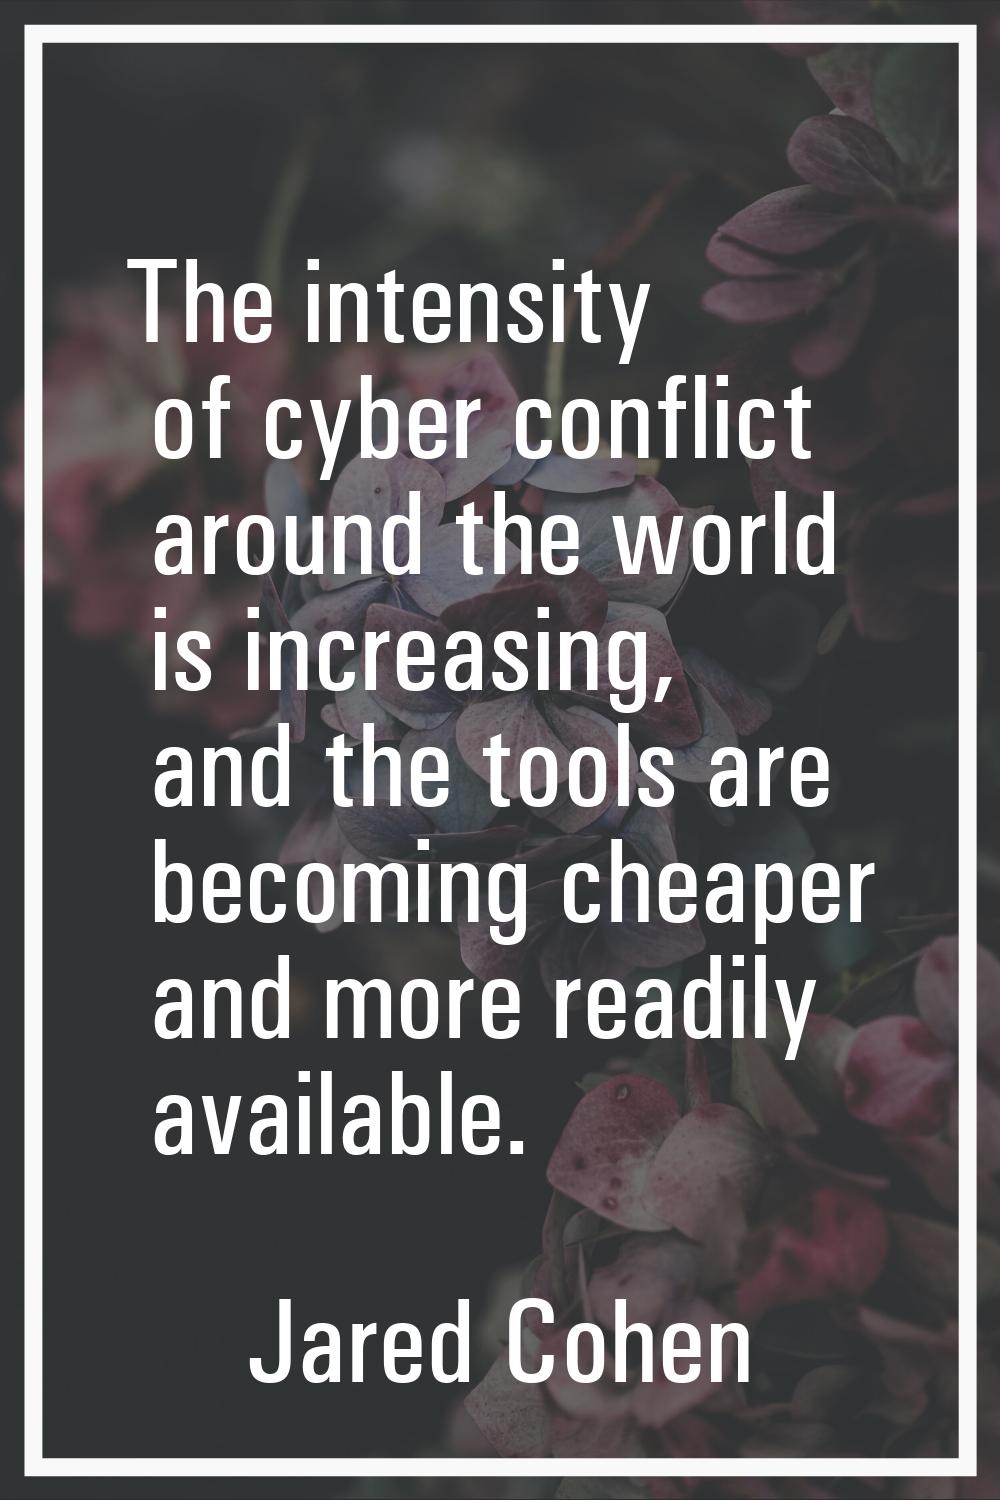 The intensity of cyber conflict around the world is increasing, and the tools are becoming cheaper 